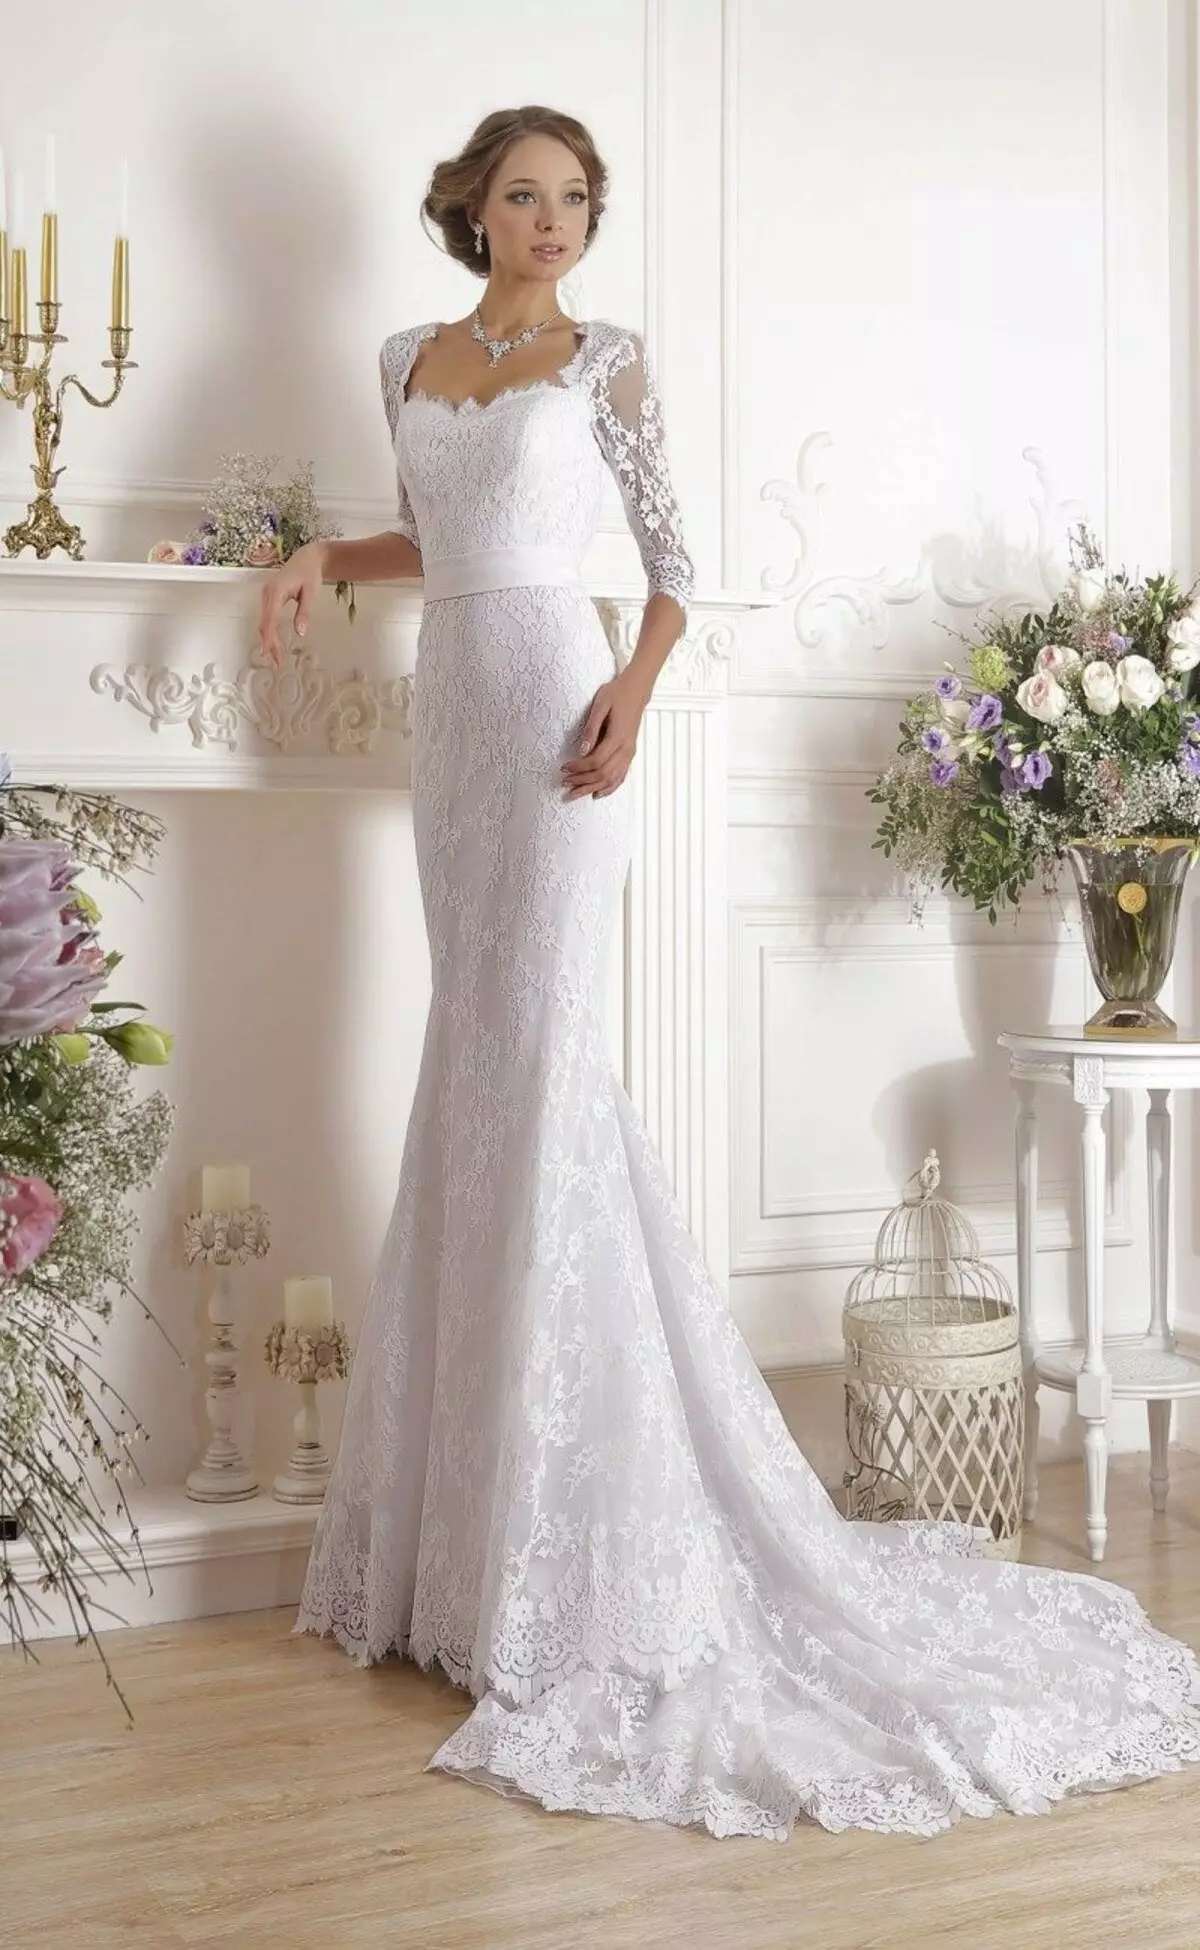 Wedding dress lace from IDYLLY collection from Naviblue Bridal